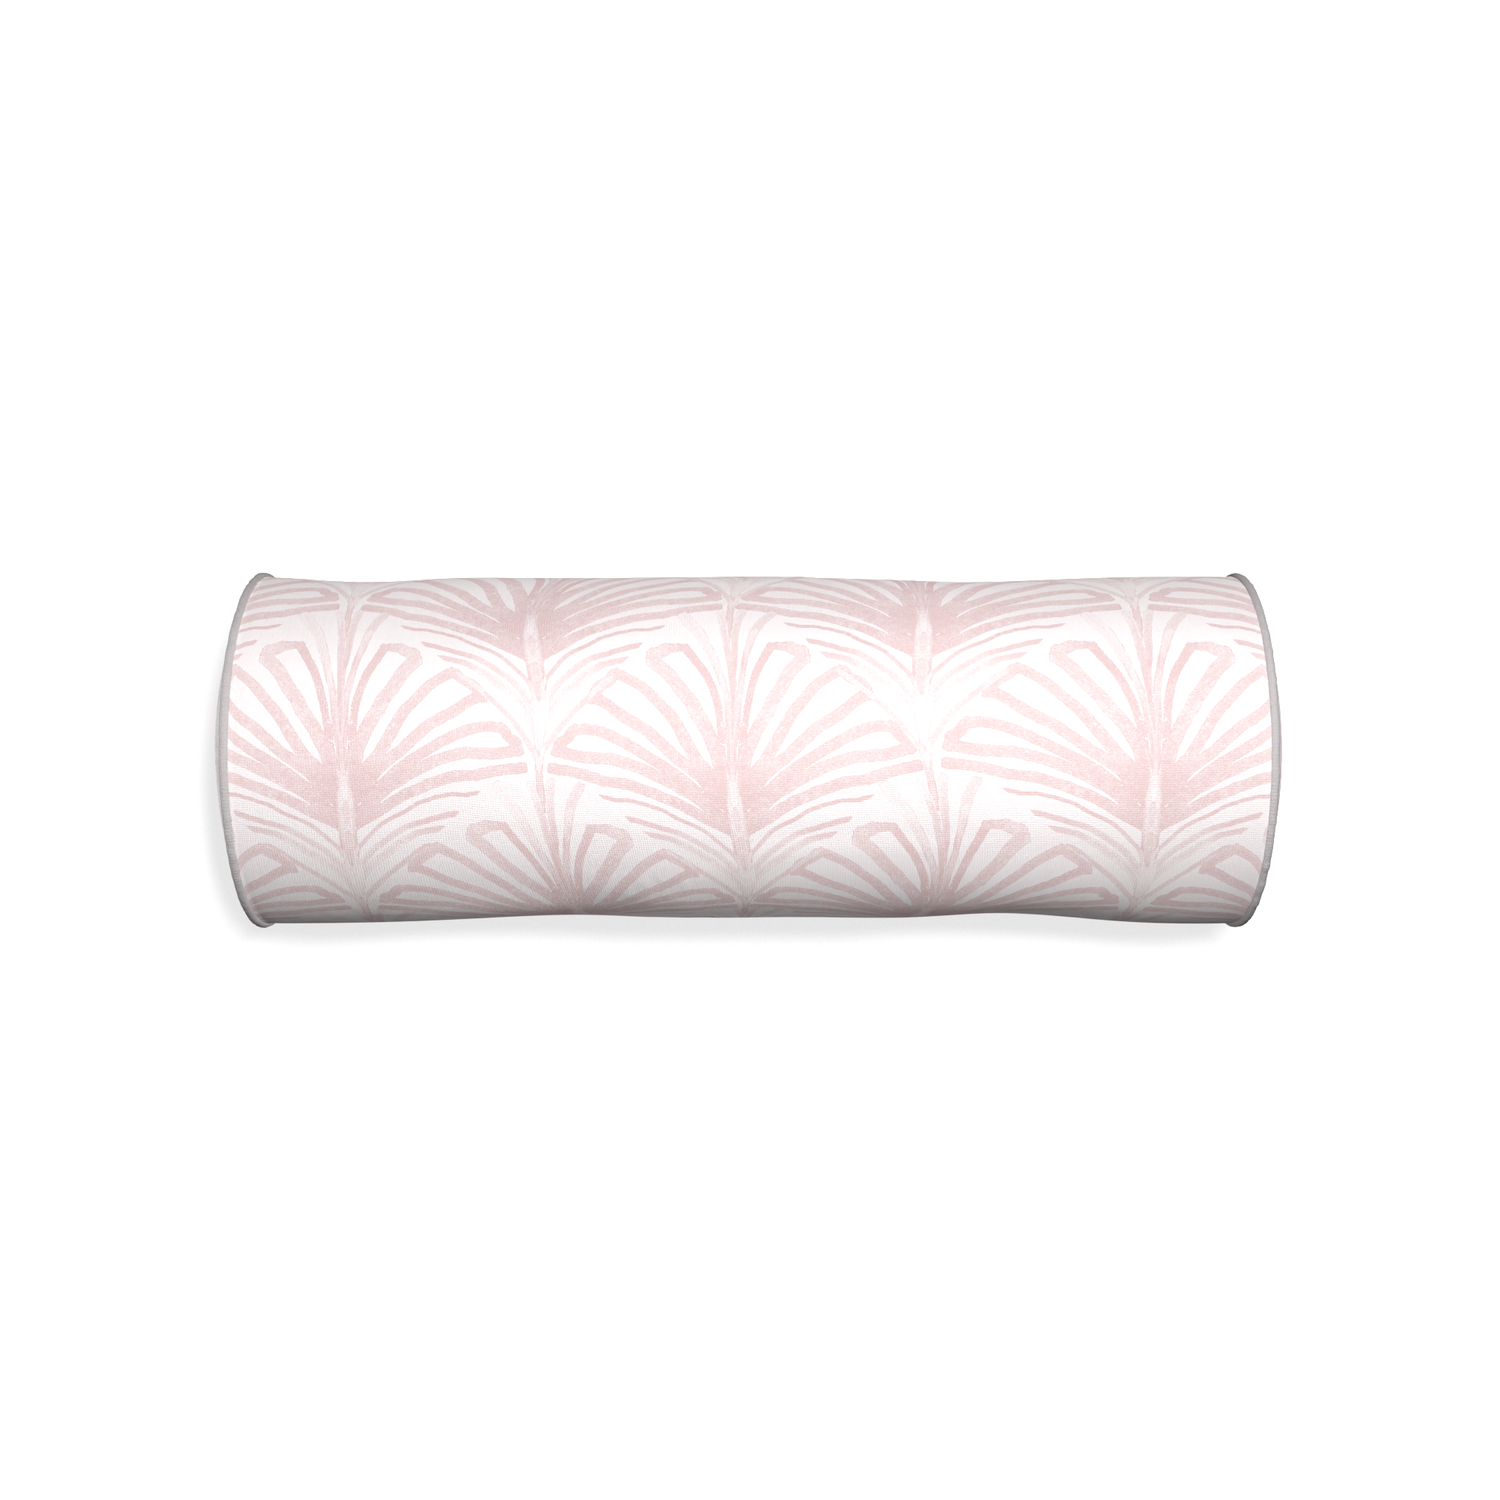 Bolster suzy rose custom pillow with pebble piping on white background